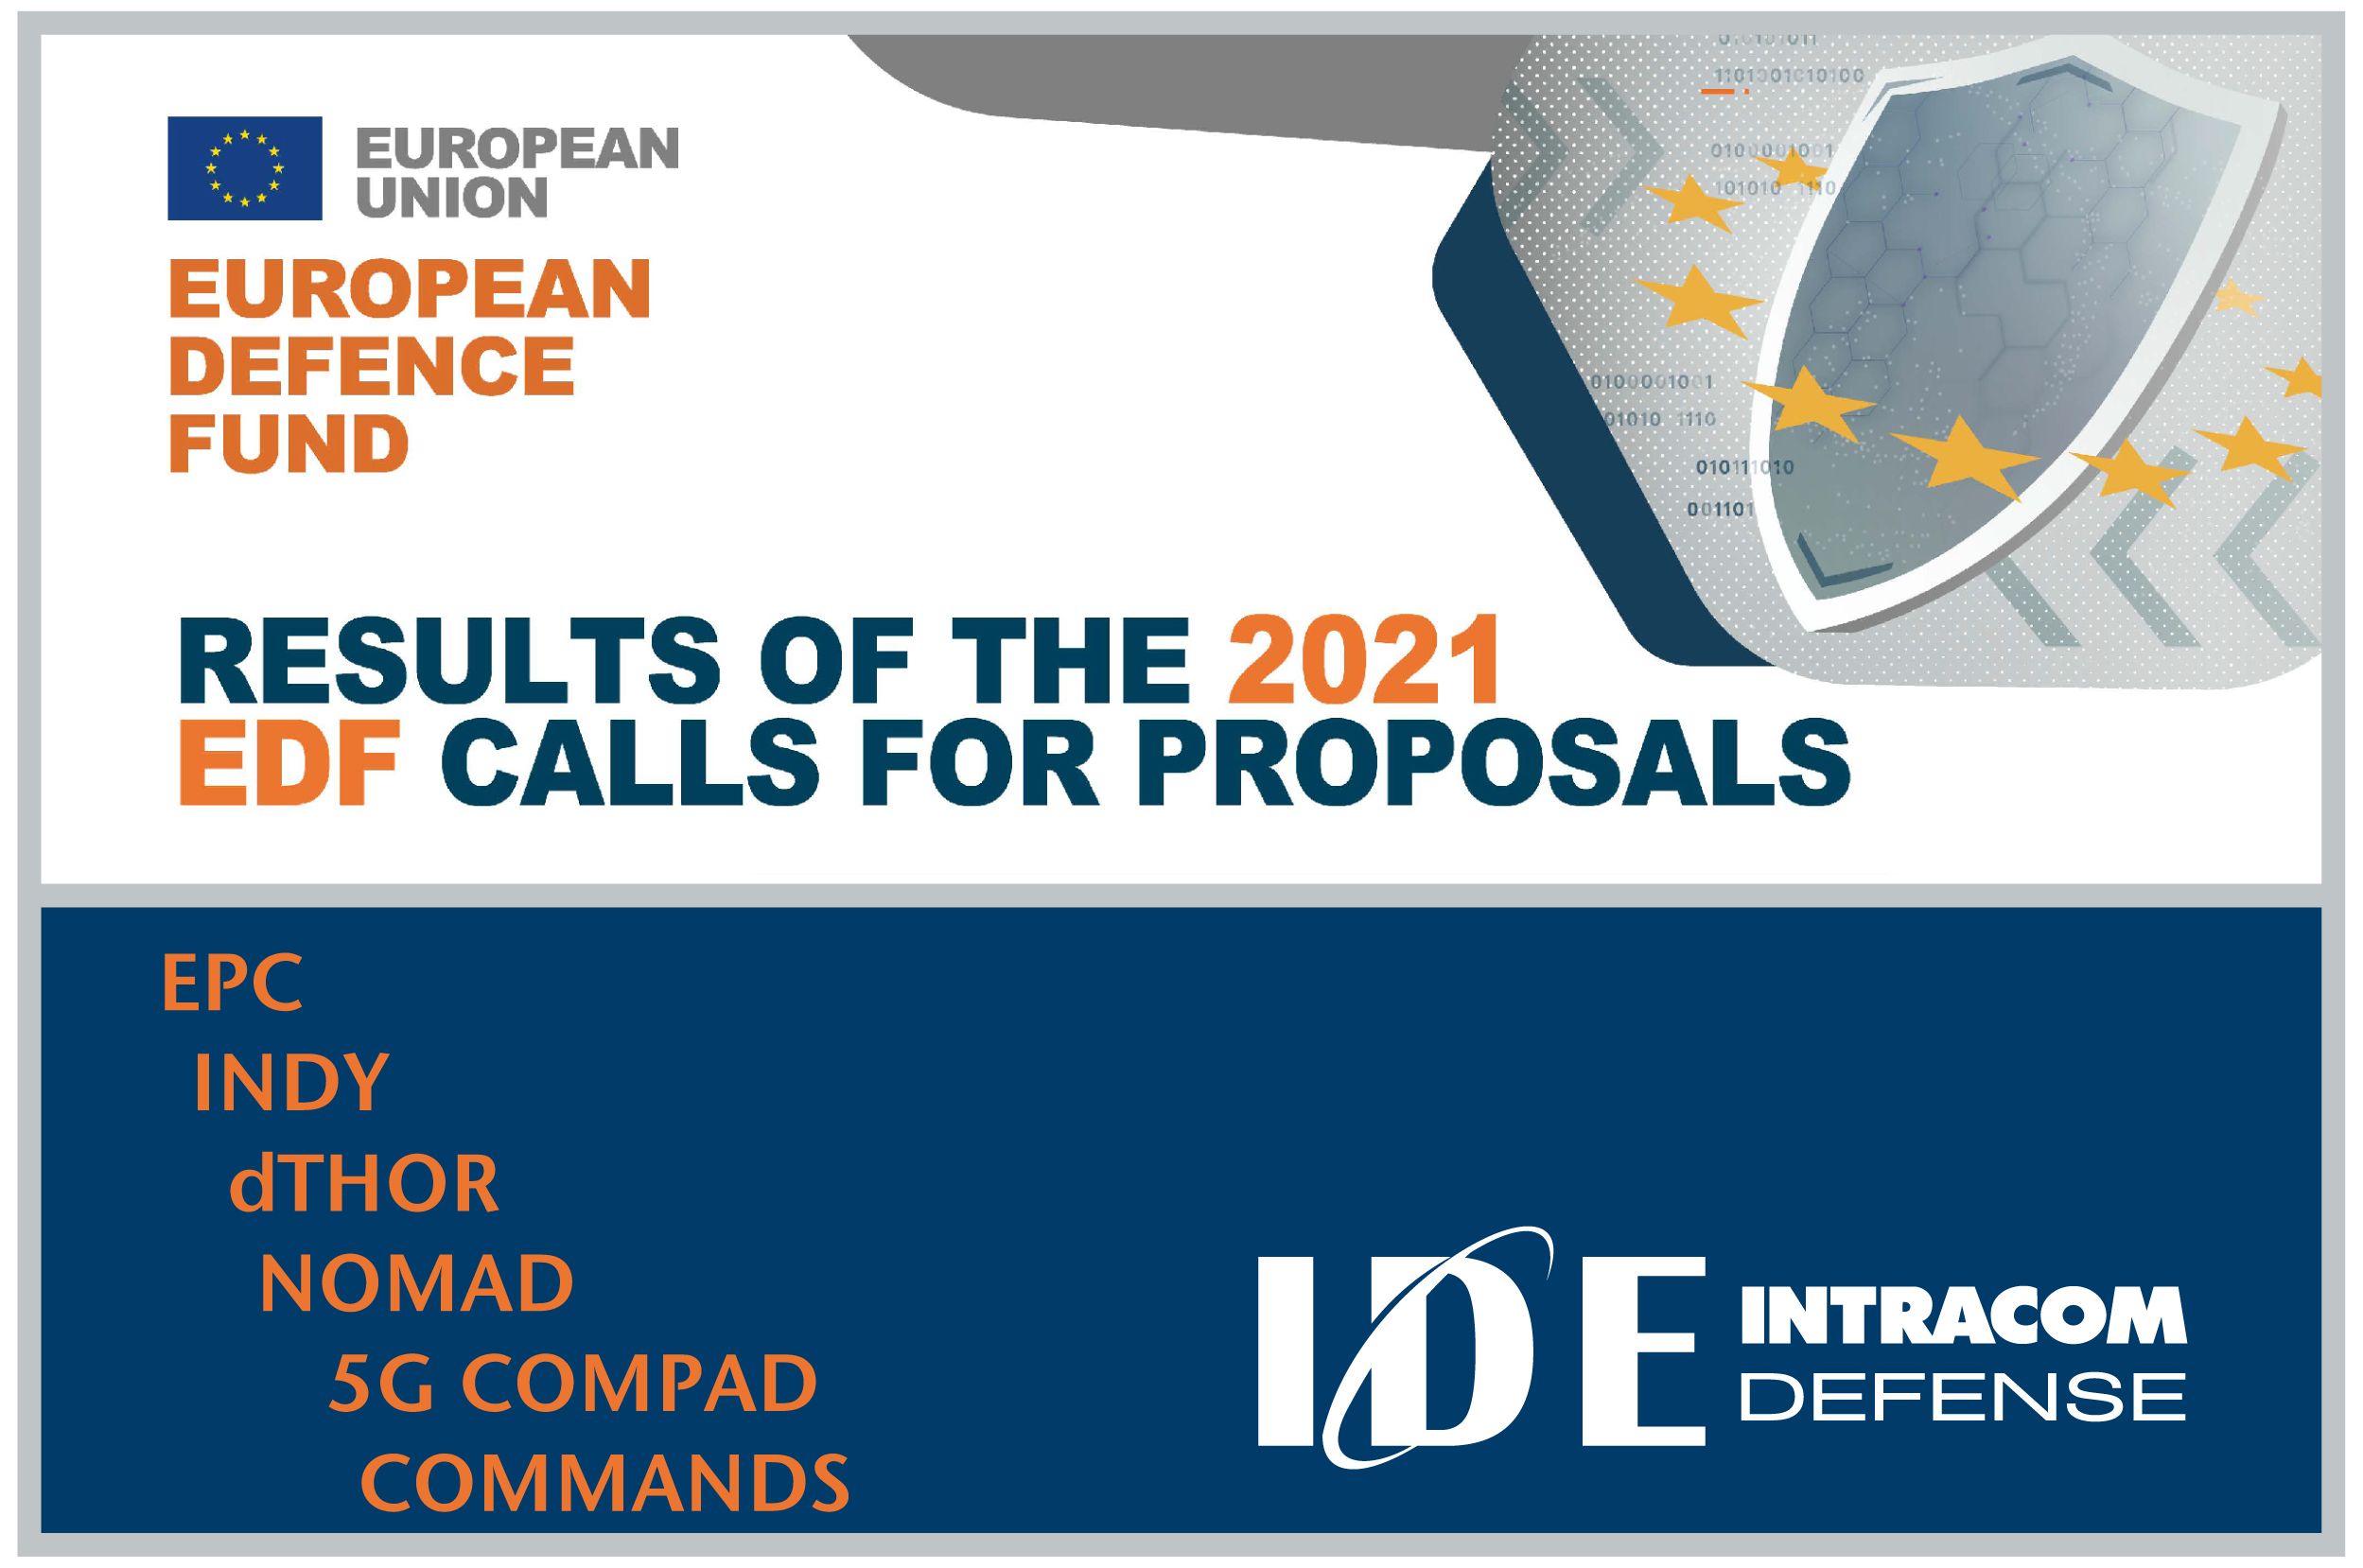 Great Success of INTRACOM DEFENSE: Six new projects Funding Approval in the context of EDF 2021